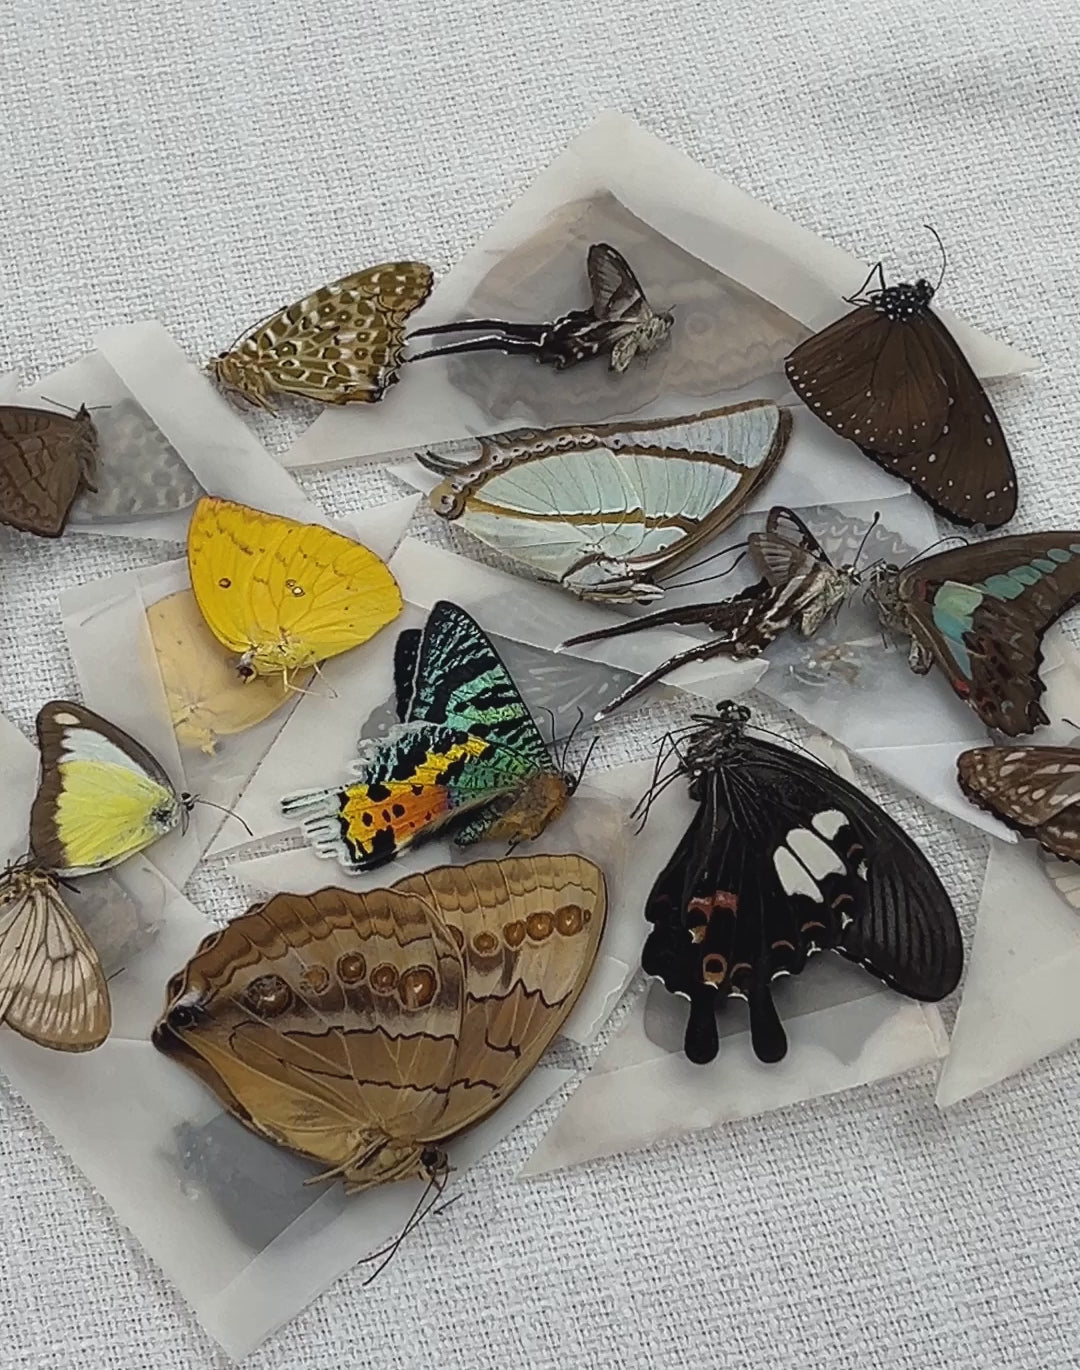 10 Random Of Real Butterfly Taxidermy Mounted Preserved Entomology Oddity Scientific Lover Insect Office Desk Art Artwork Display UM-01-NEW